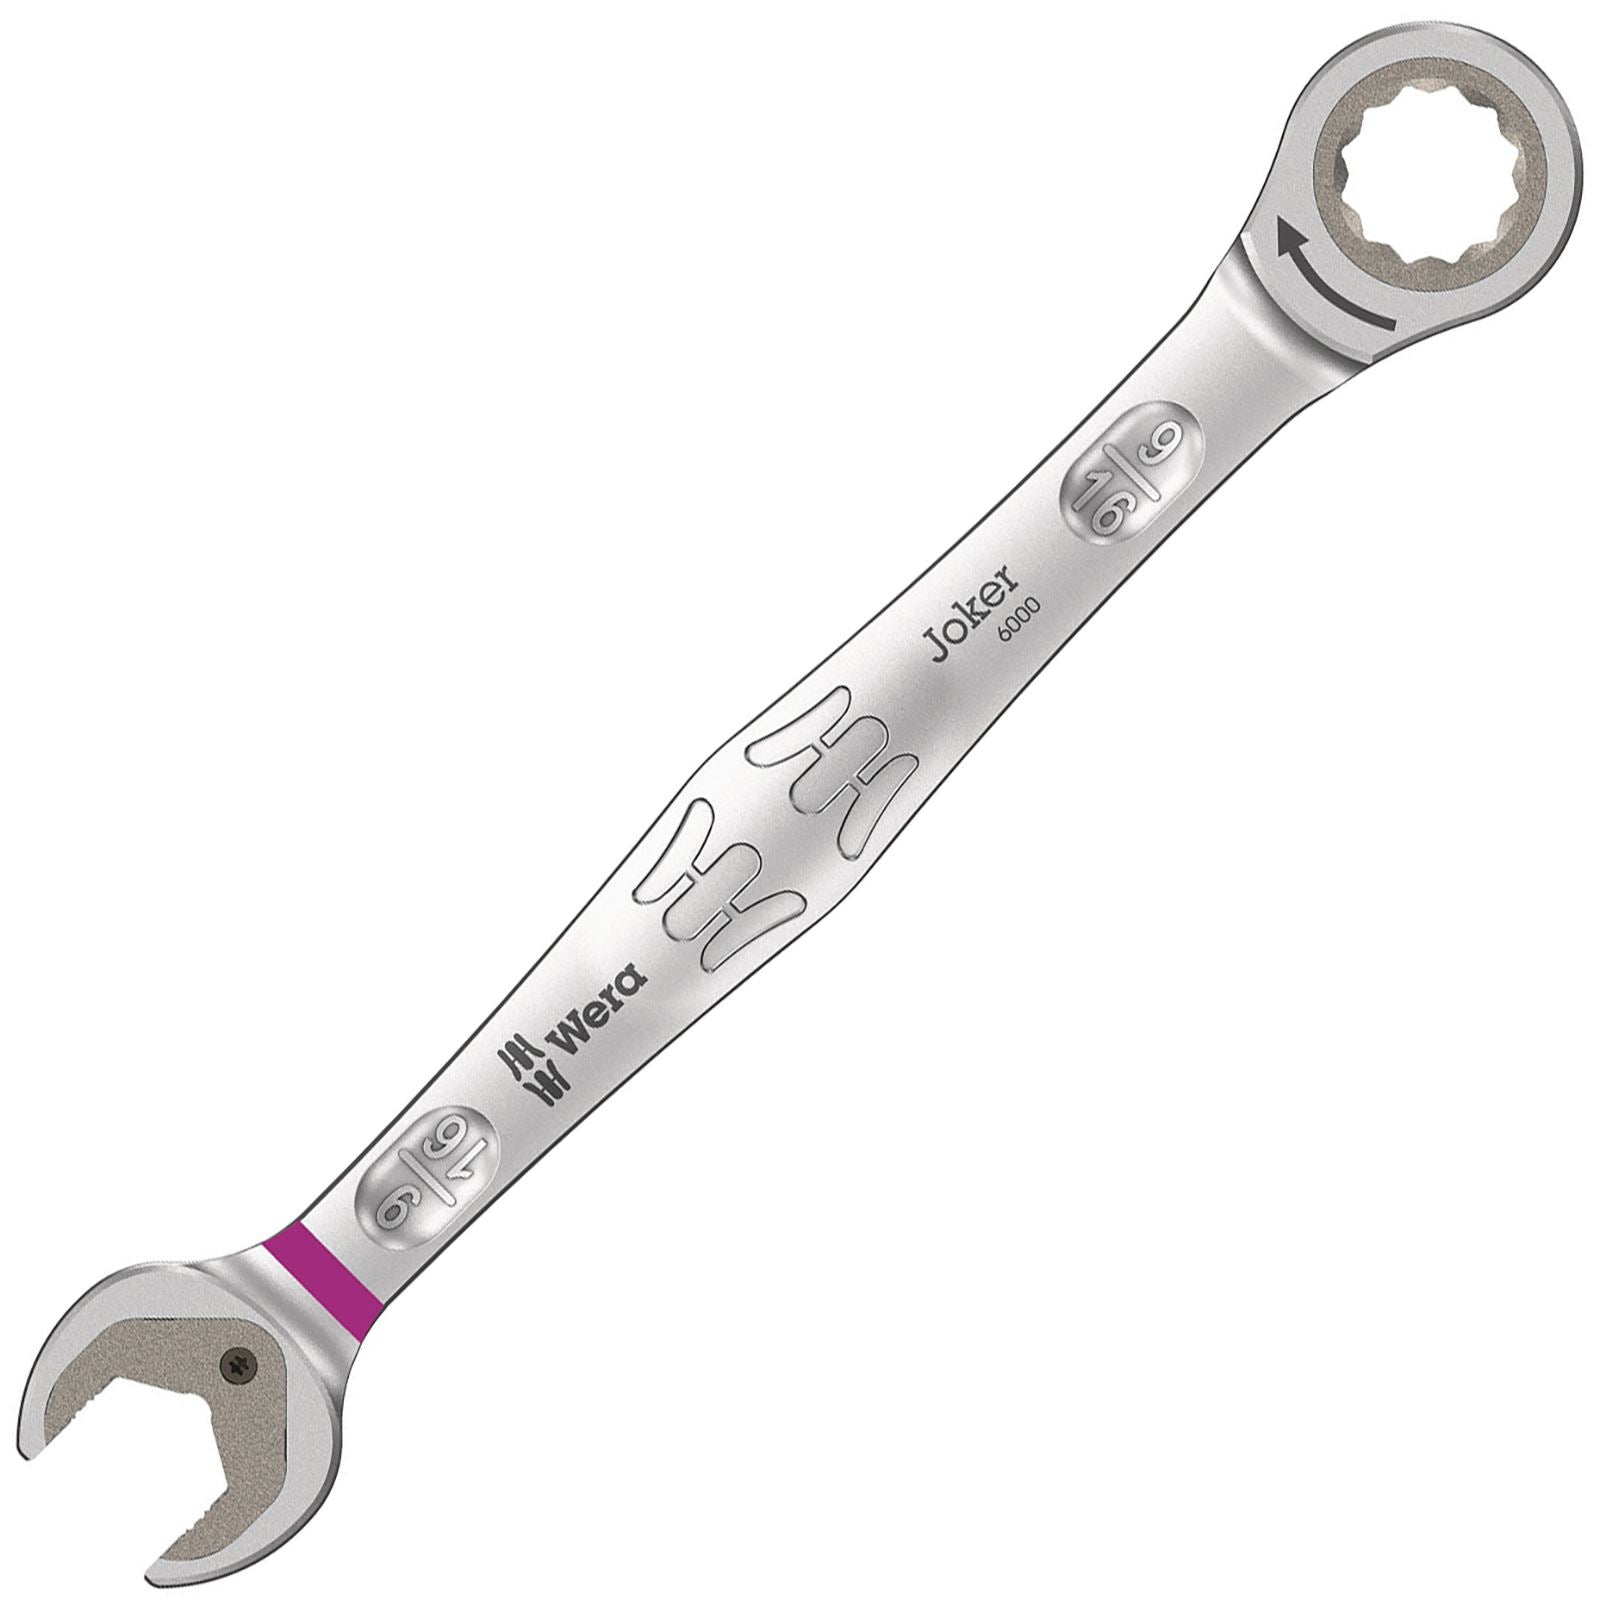 Wera Ratchet Combination Spanner Wrench 6000 Joker Metric Imperial Open End Ring Choose Size